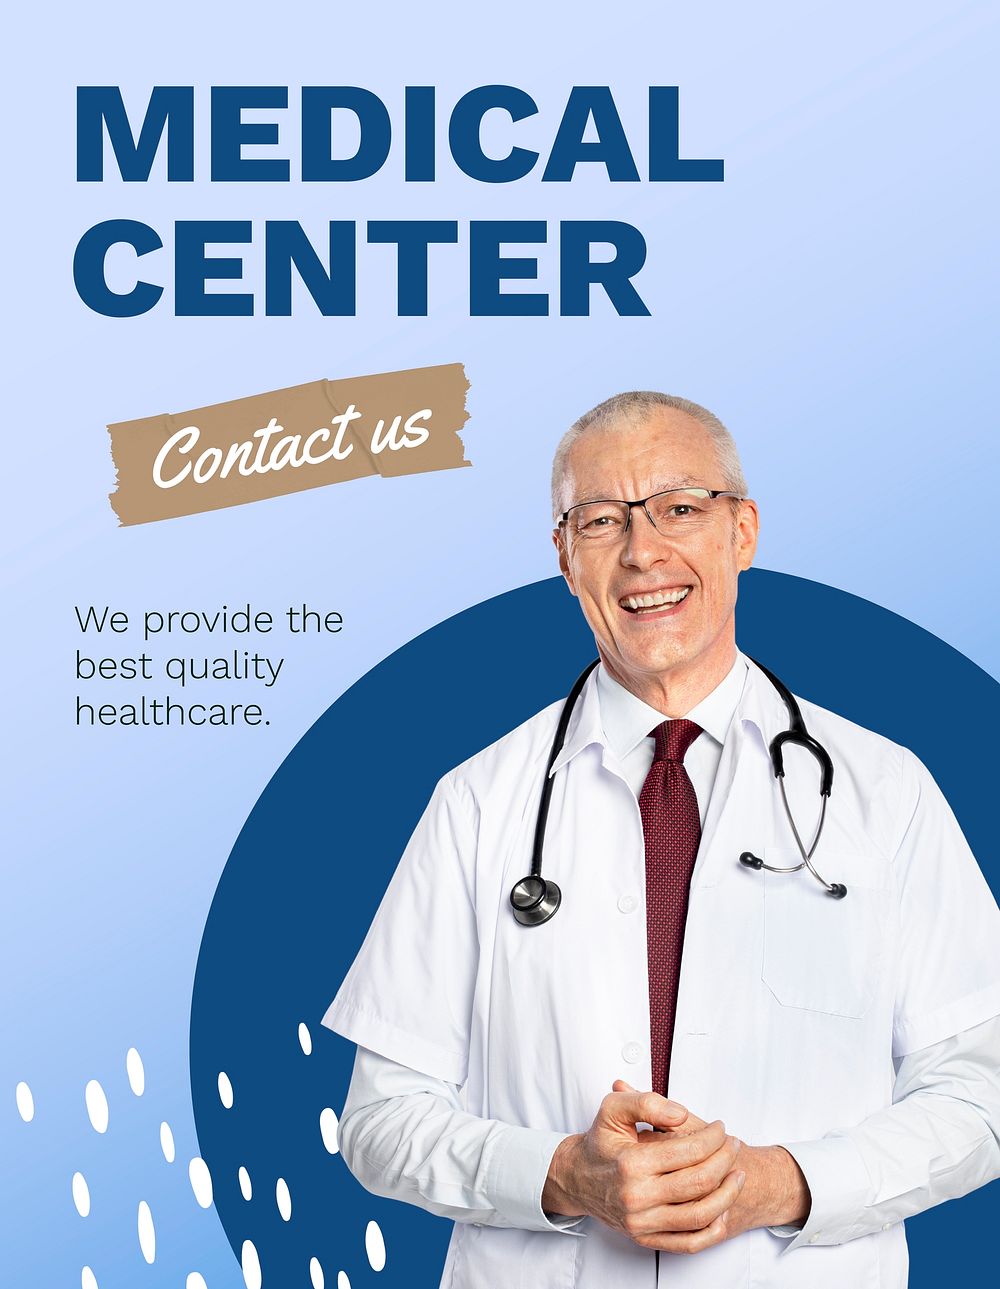 Medical center flyer template, healthcare campaign psd